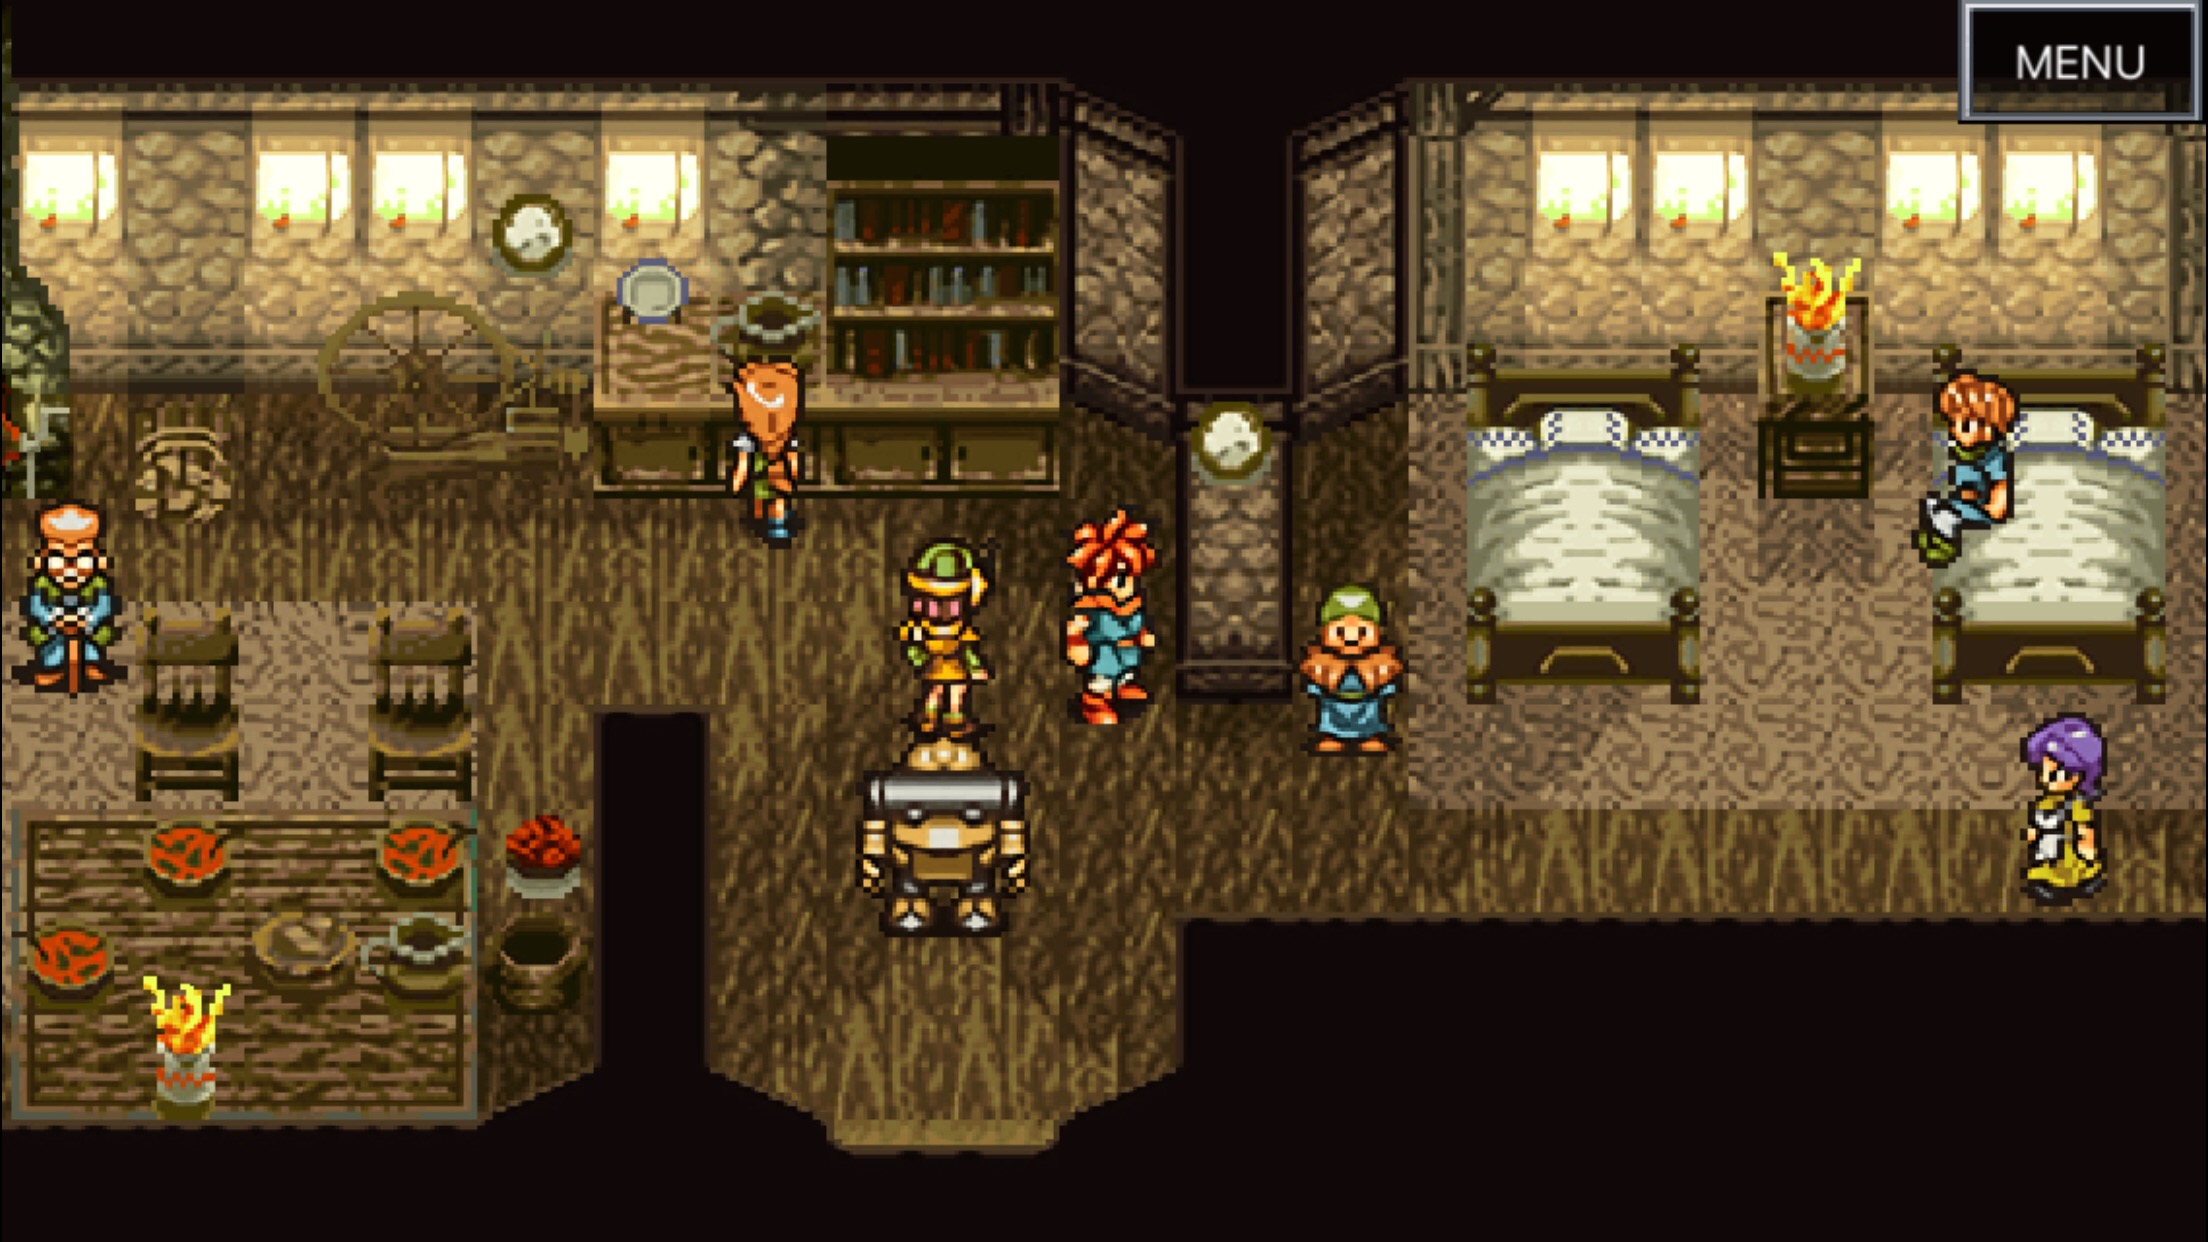 The New 'Chrono Trigger' Isn't a Mobile Port, Everyone